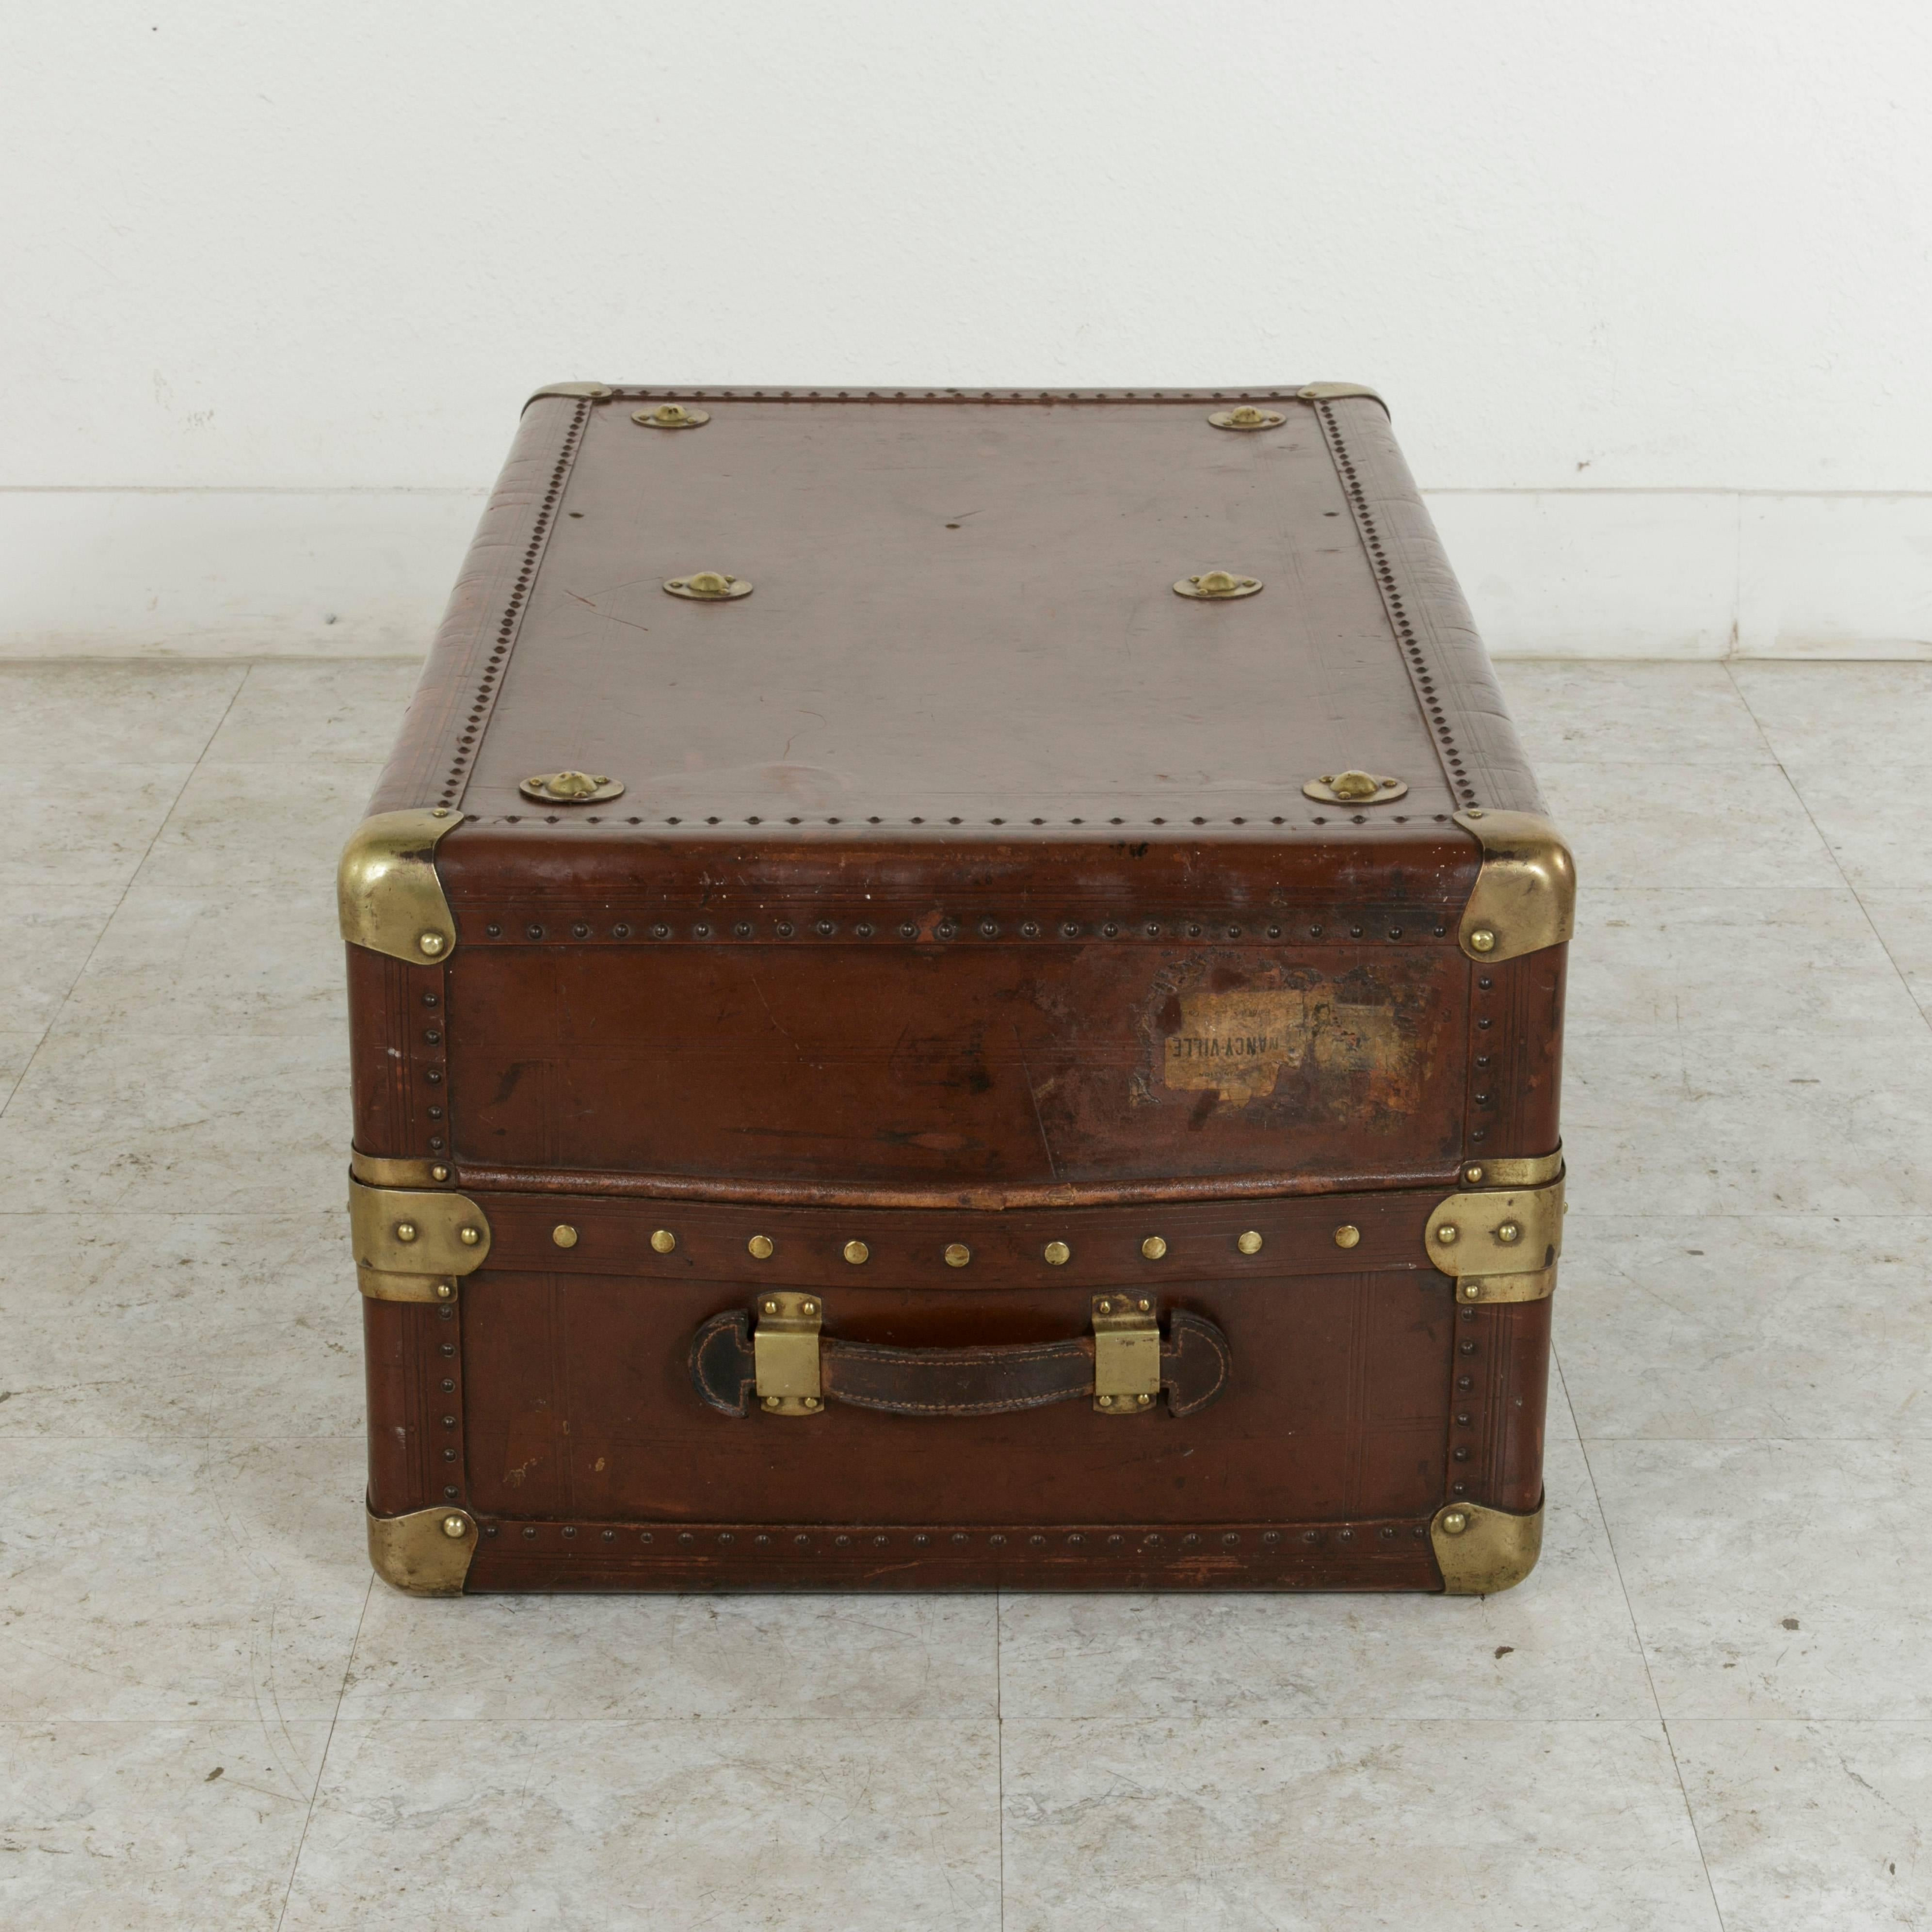 Early 20th Century French Leather Steam Trunk or Coffee Table with Brass Detailing, circa 1900